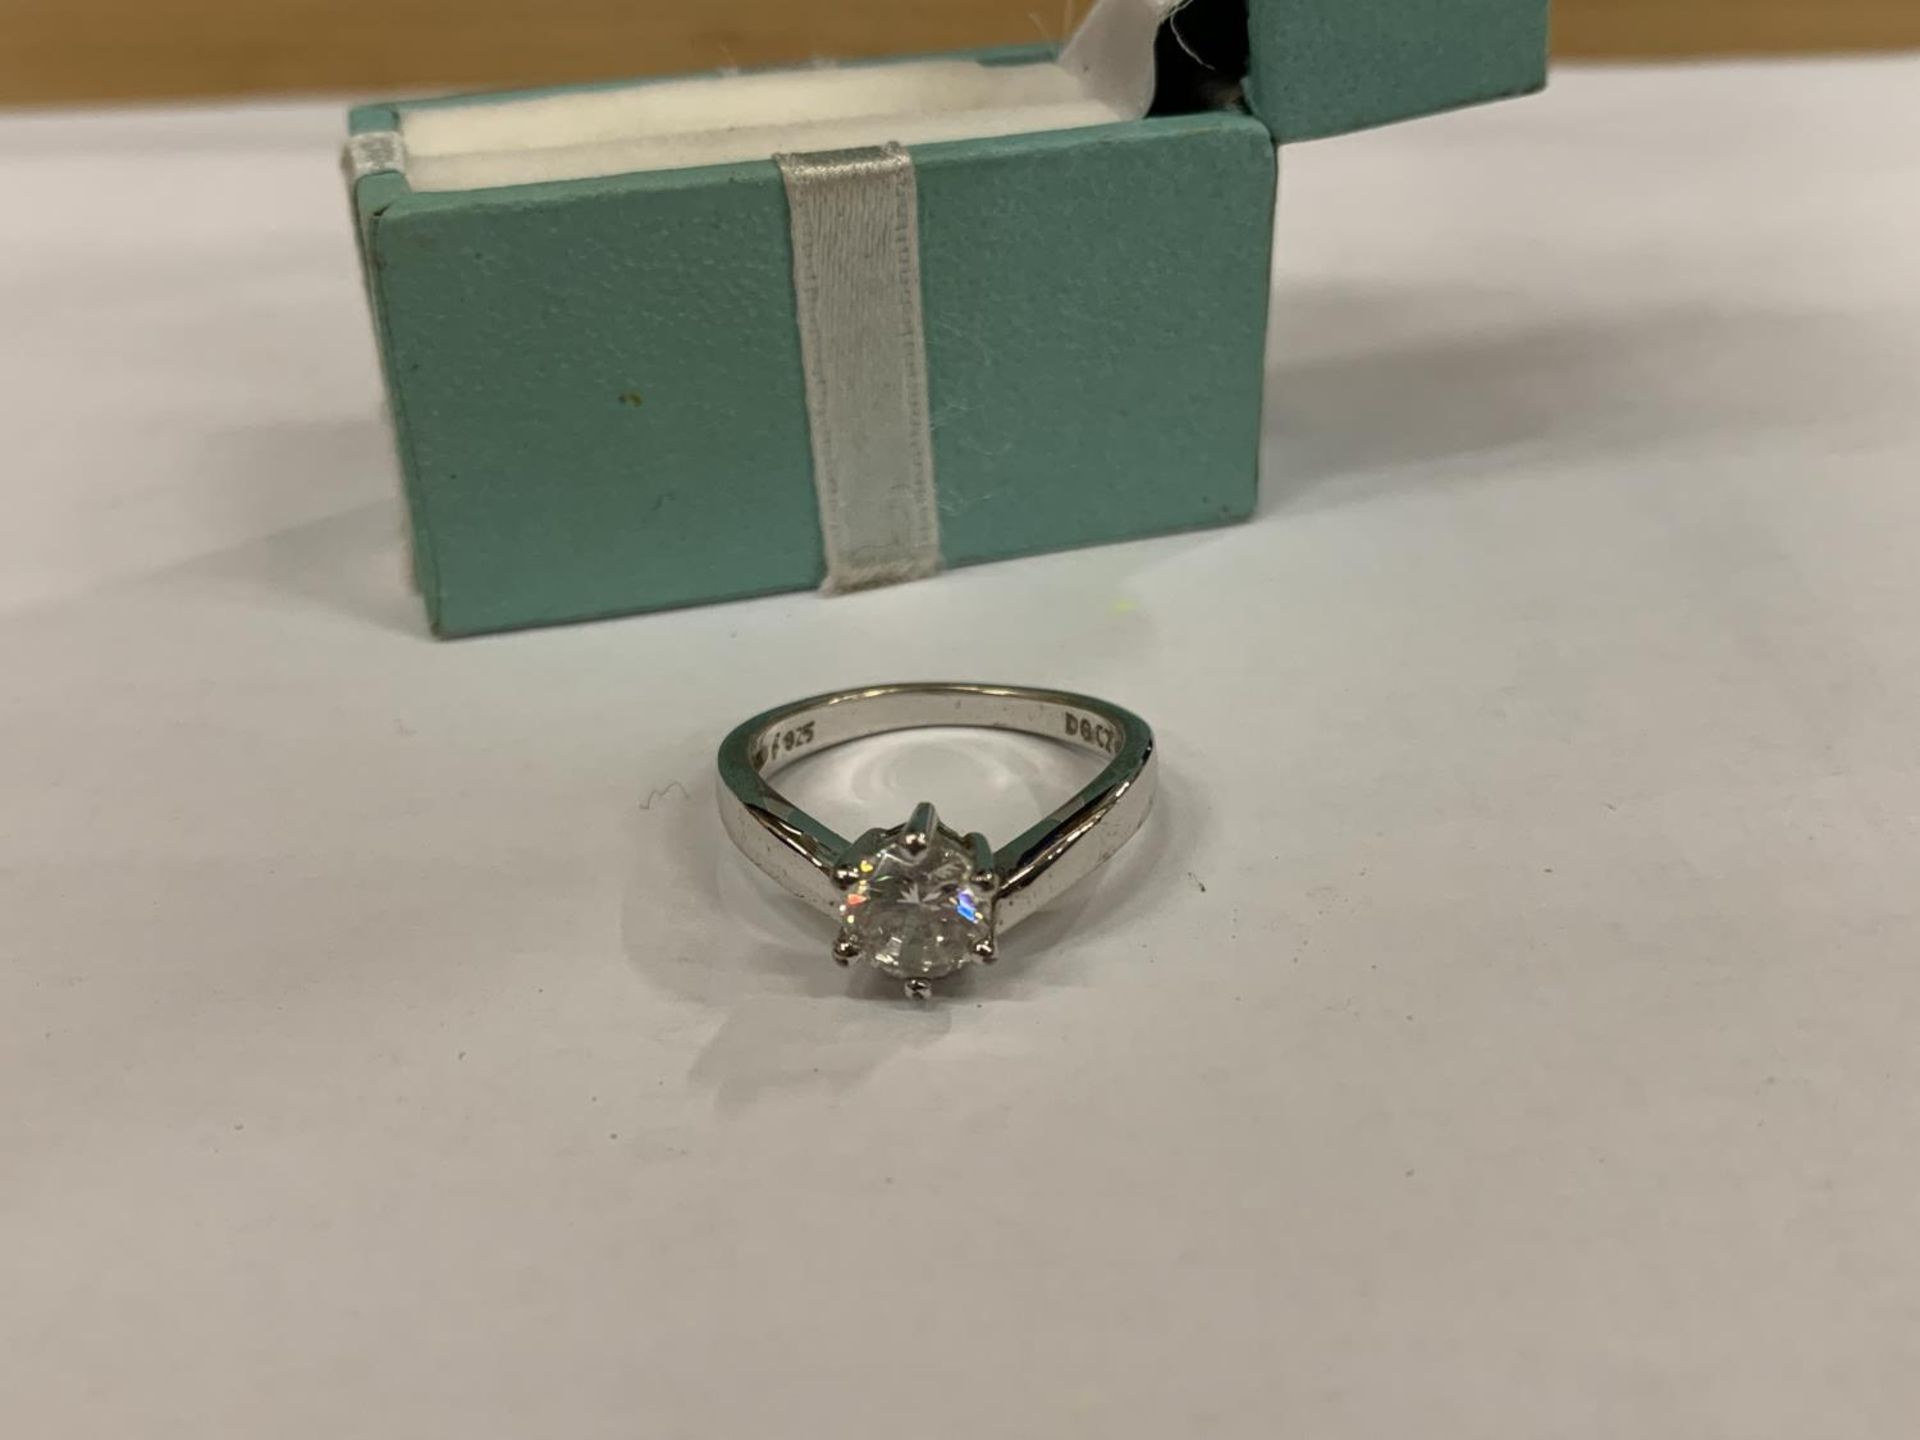 A SILVER SOLITAIRE RING IN A PRESENTATION BOX - Image 3 of 4